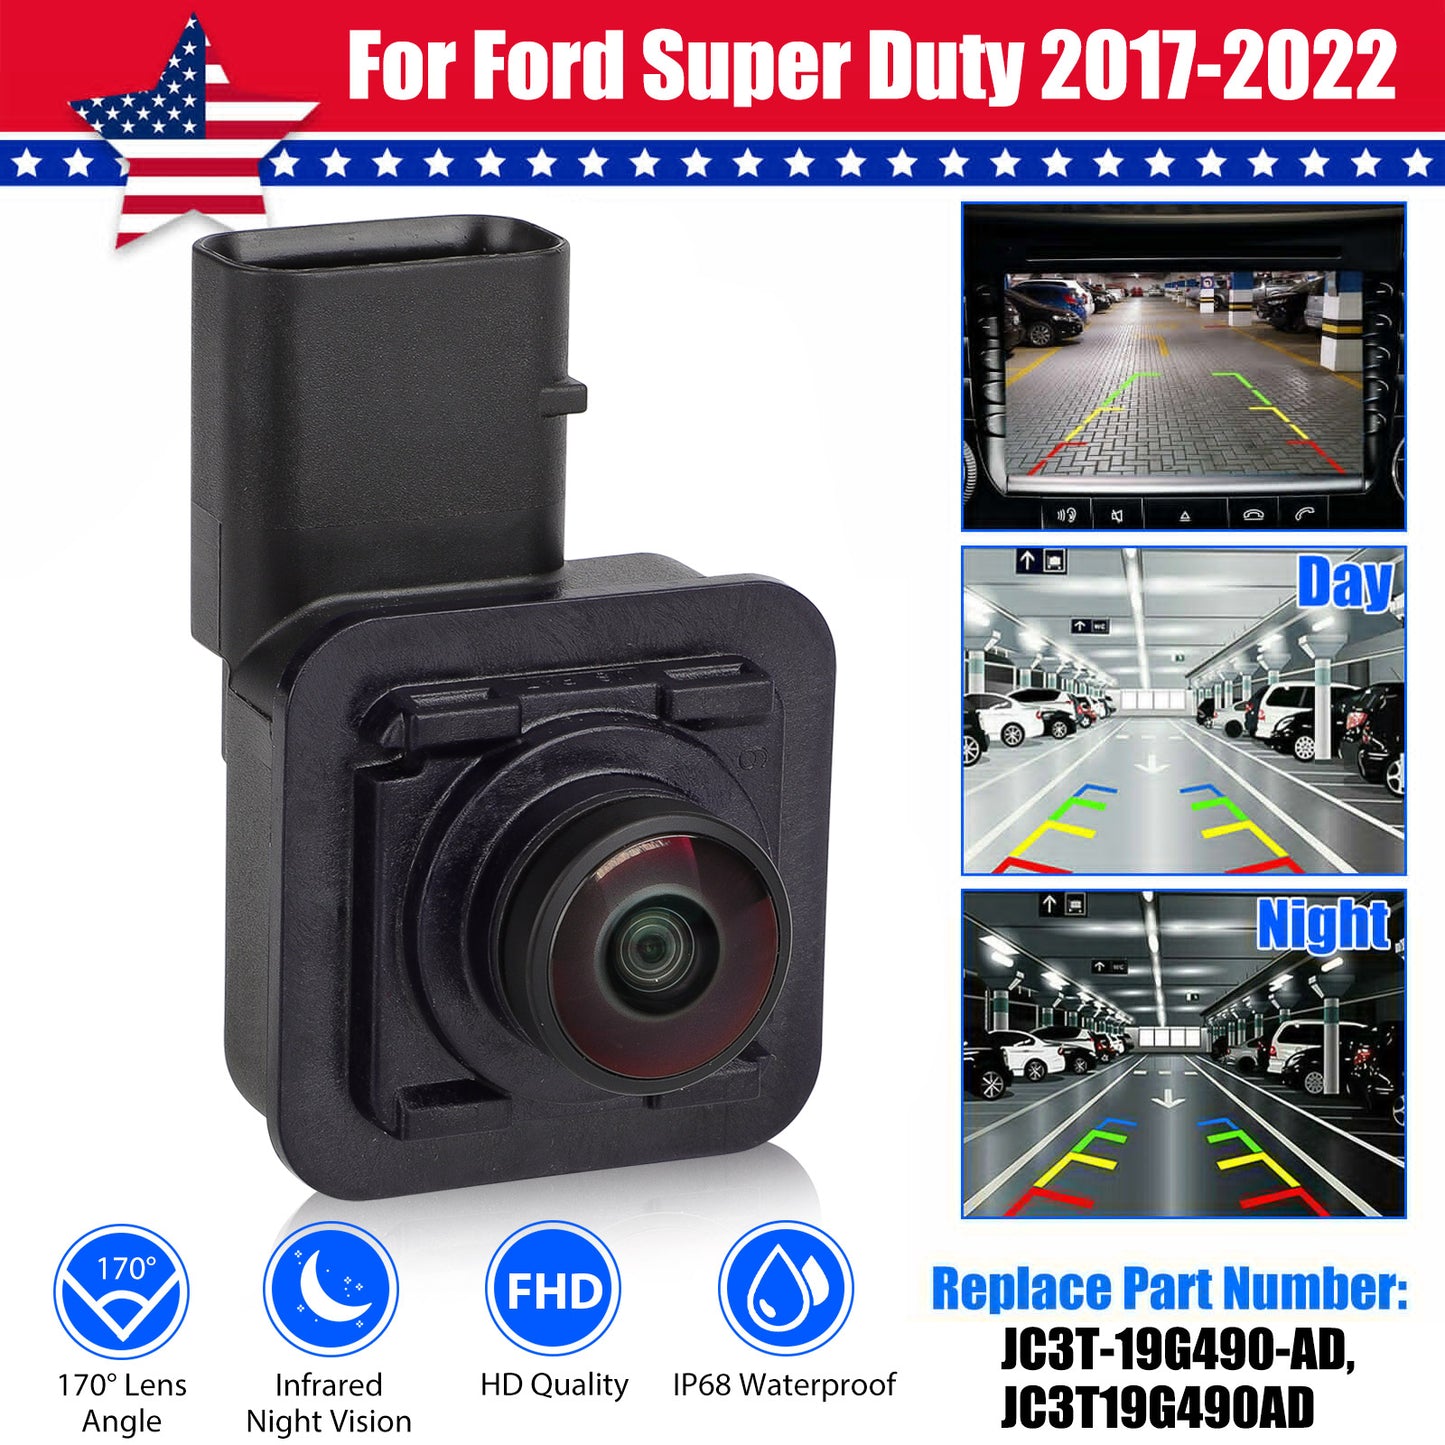 Rear View Camera for Ford Super Duty 2017-2022 - Enhanced Safety and Durability